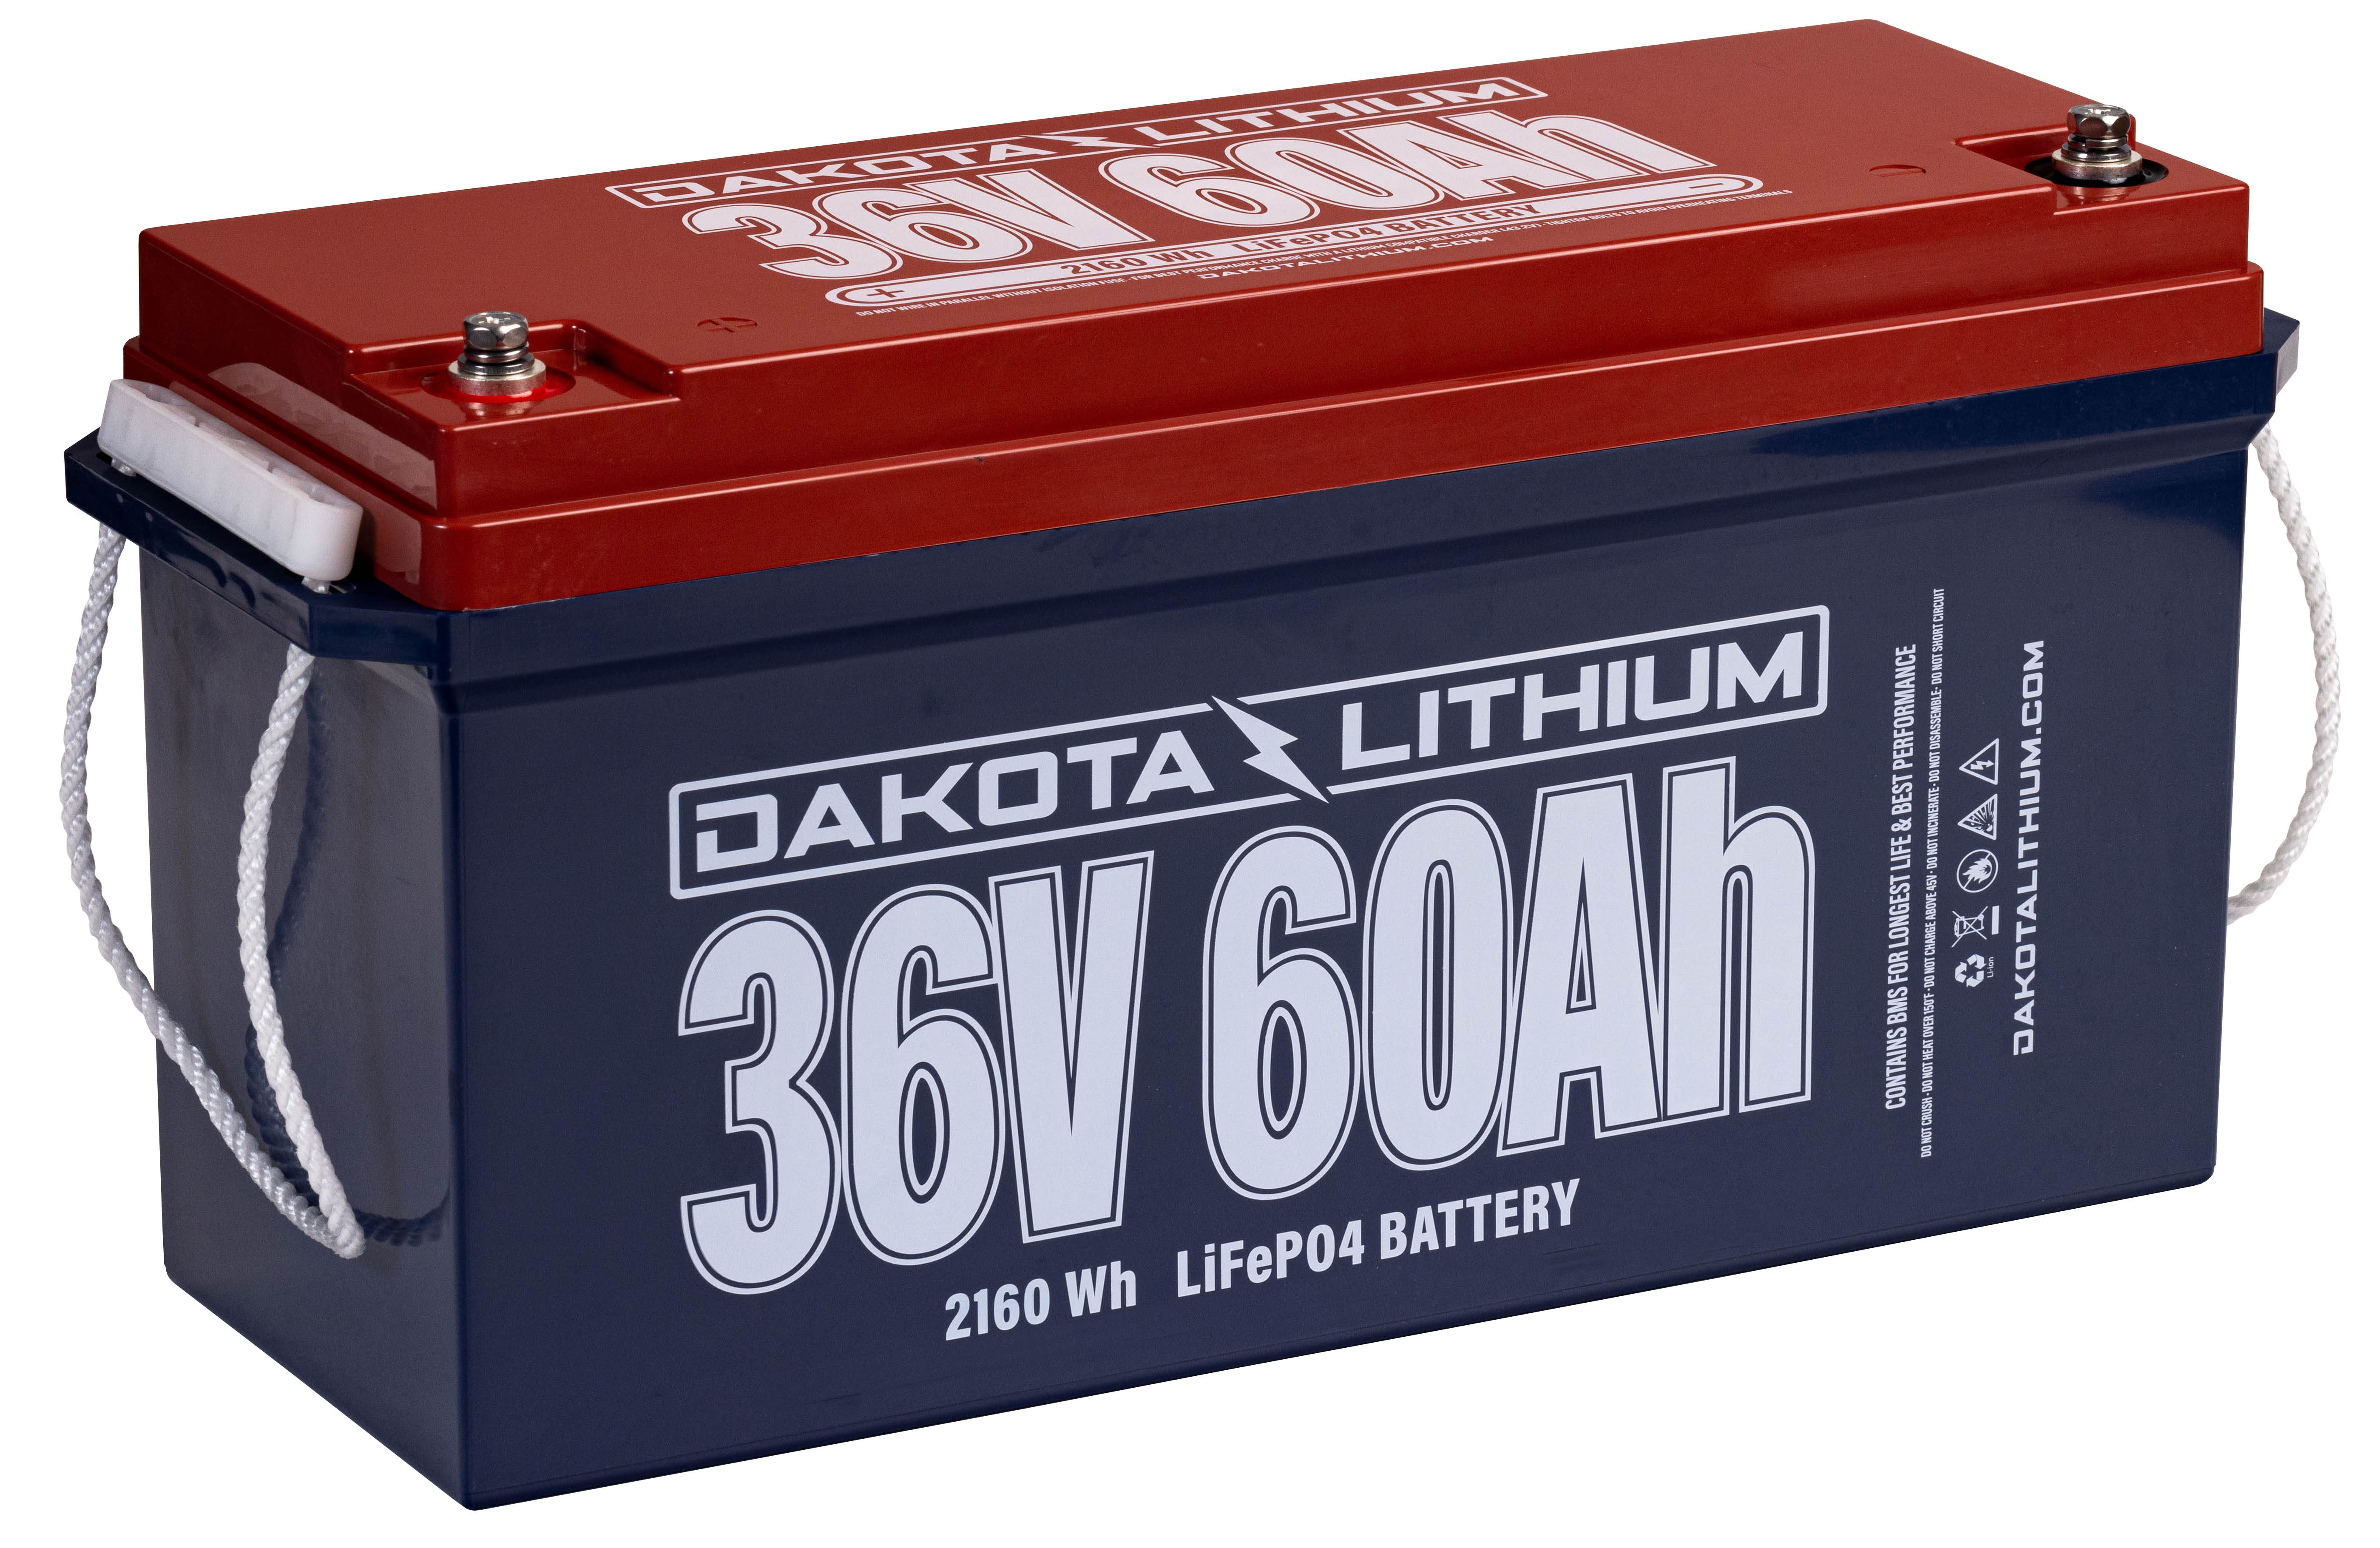 DAKOTA LITHIUM 36V 60AH Deep Cycle Lithium Battery. Group 31 Format. In Stock. Includes Charger and 11 Year Warranty